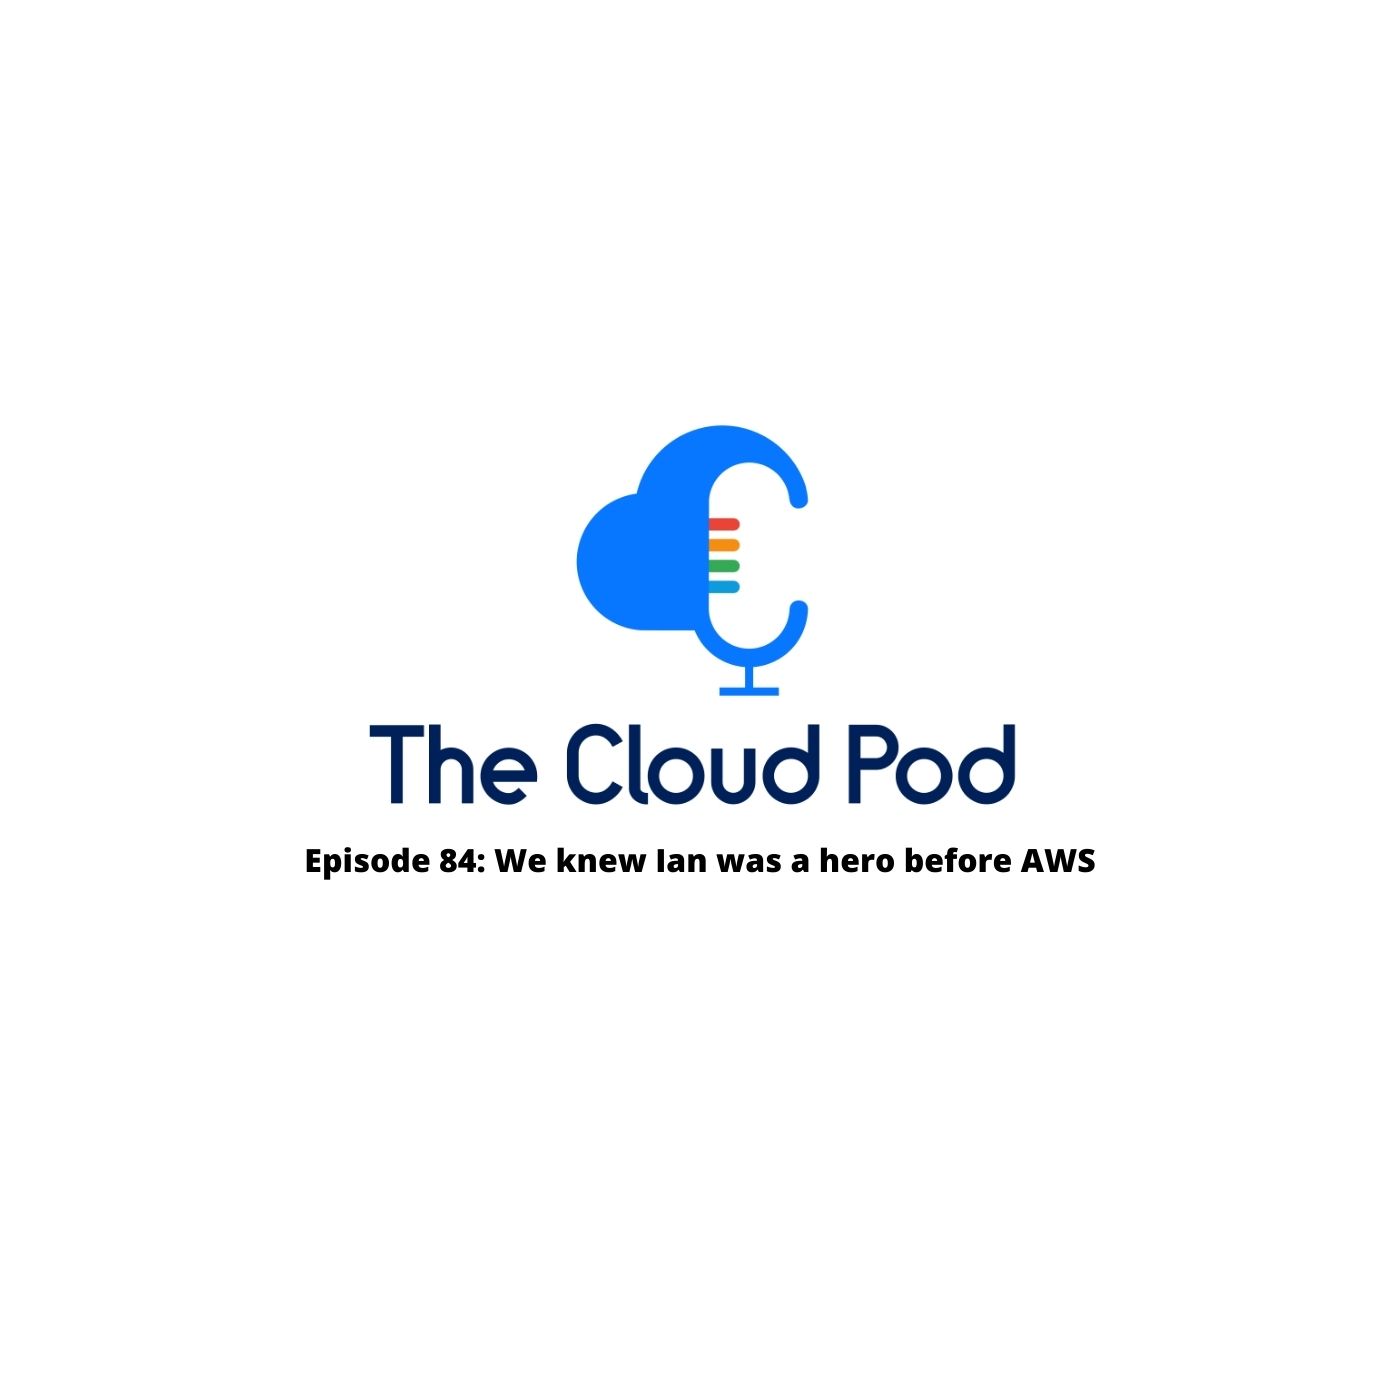 Episode 84: We knew Ian was a hero before AWS